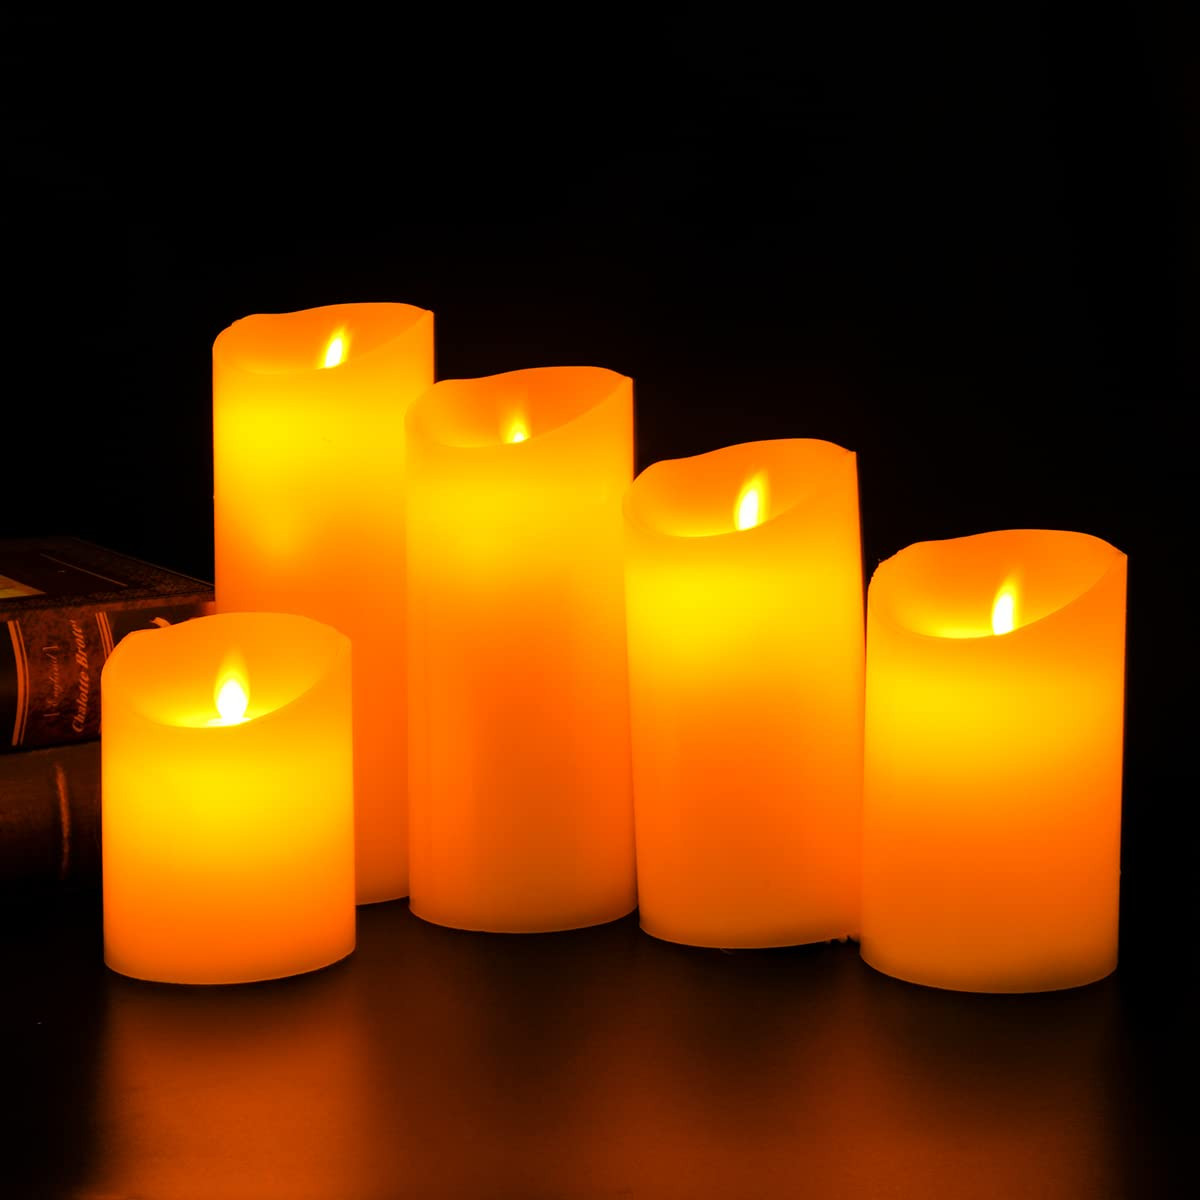 Kuber LED Candles for Home Decoration | Battey Operated |Flameless Yellow Light| Diwali Lights for Home Decoration, Along with Other Festivities & Parties | Pack of 5